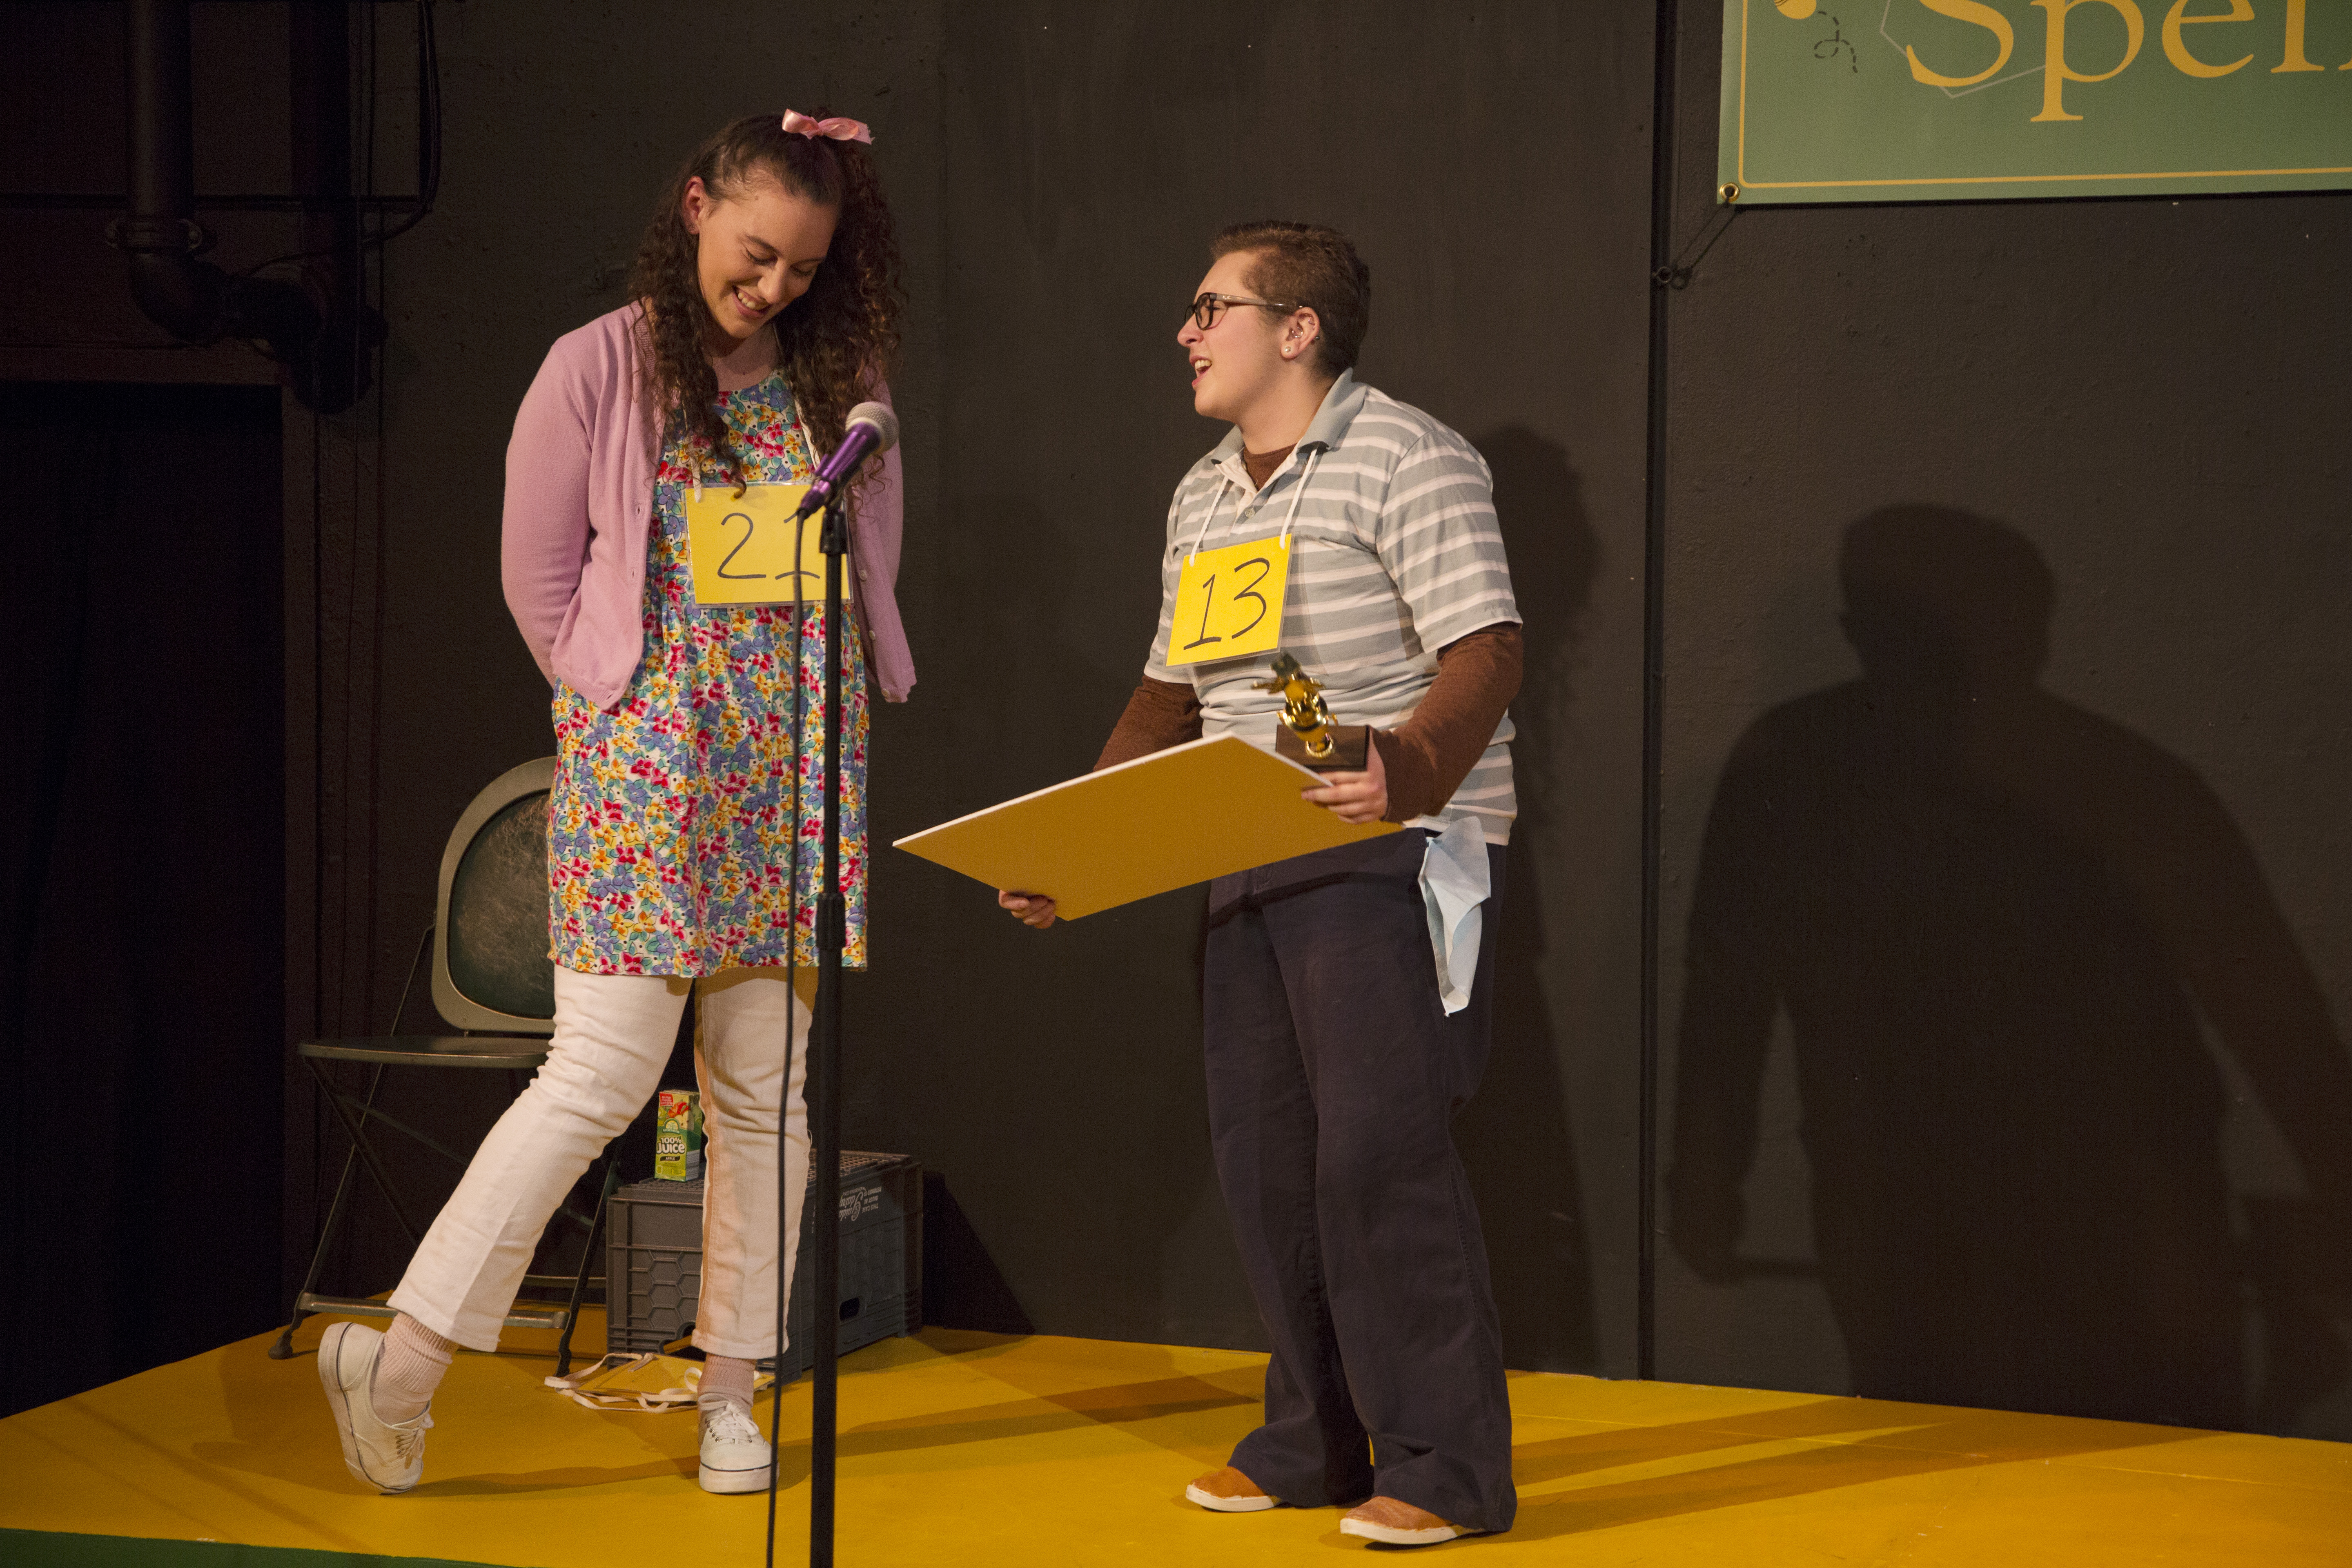 25th Annual Putnam County Spelling Bee, Fall 2016